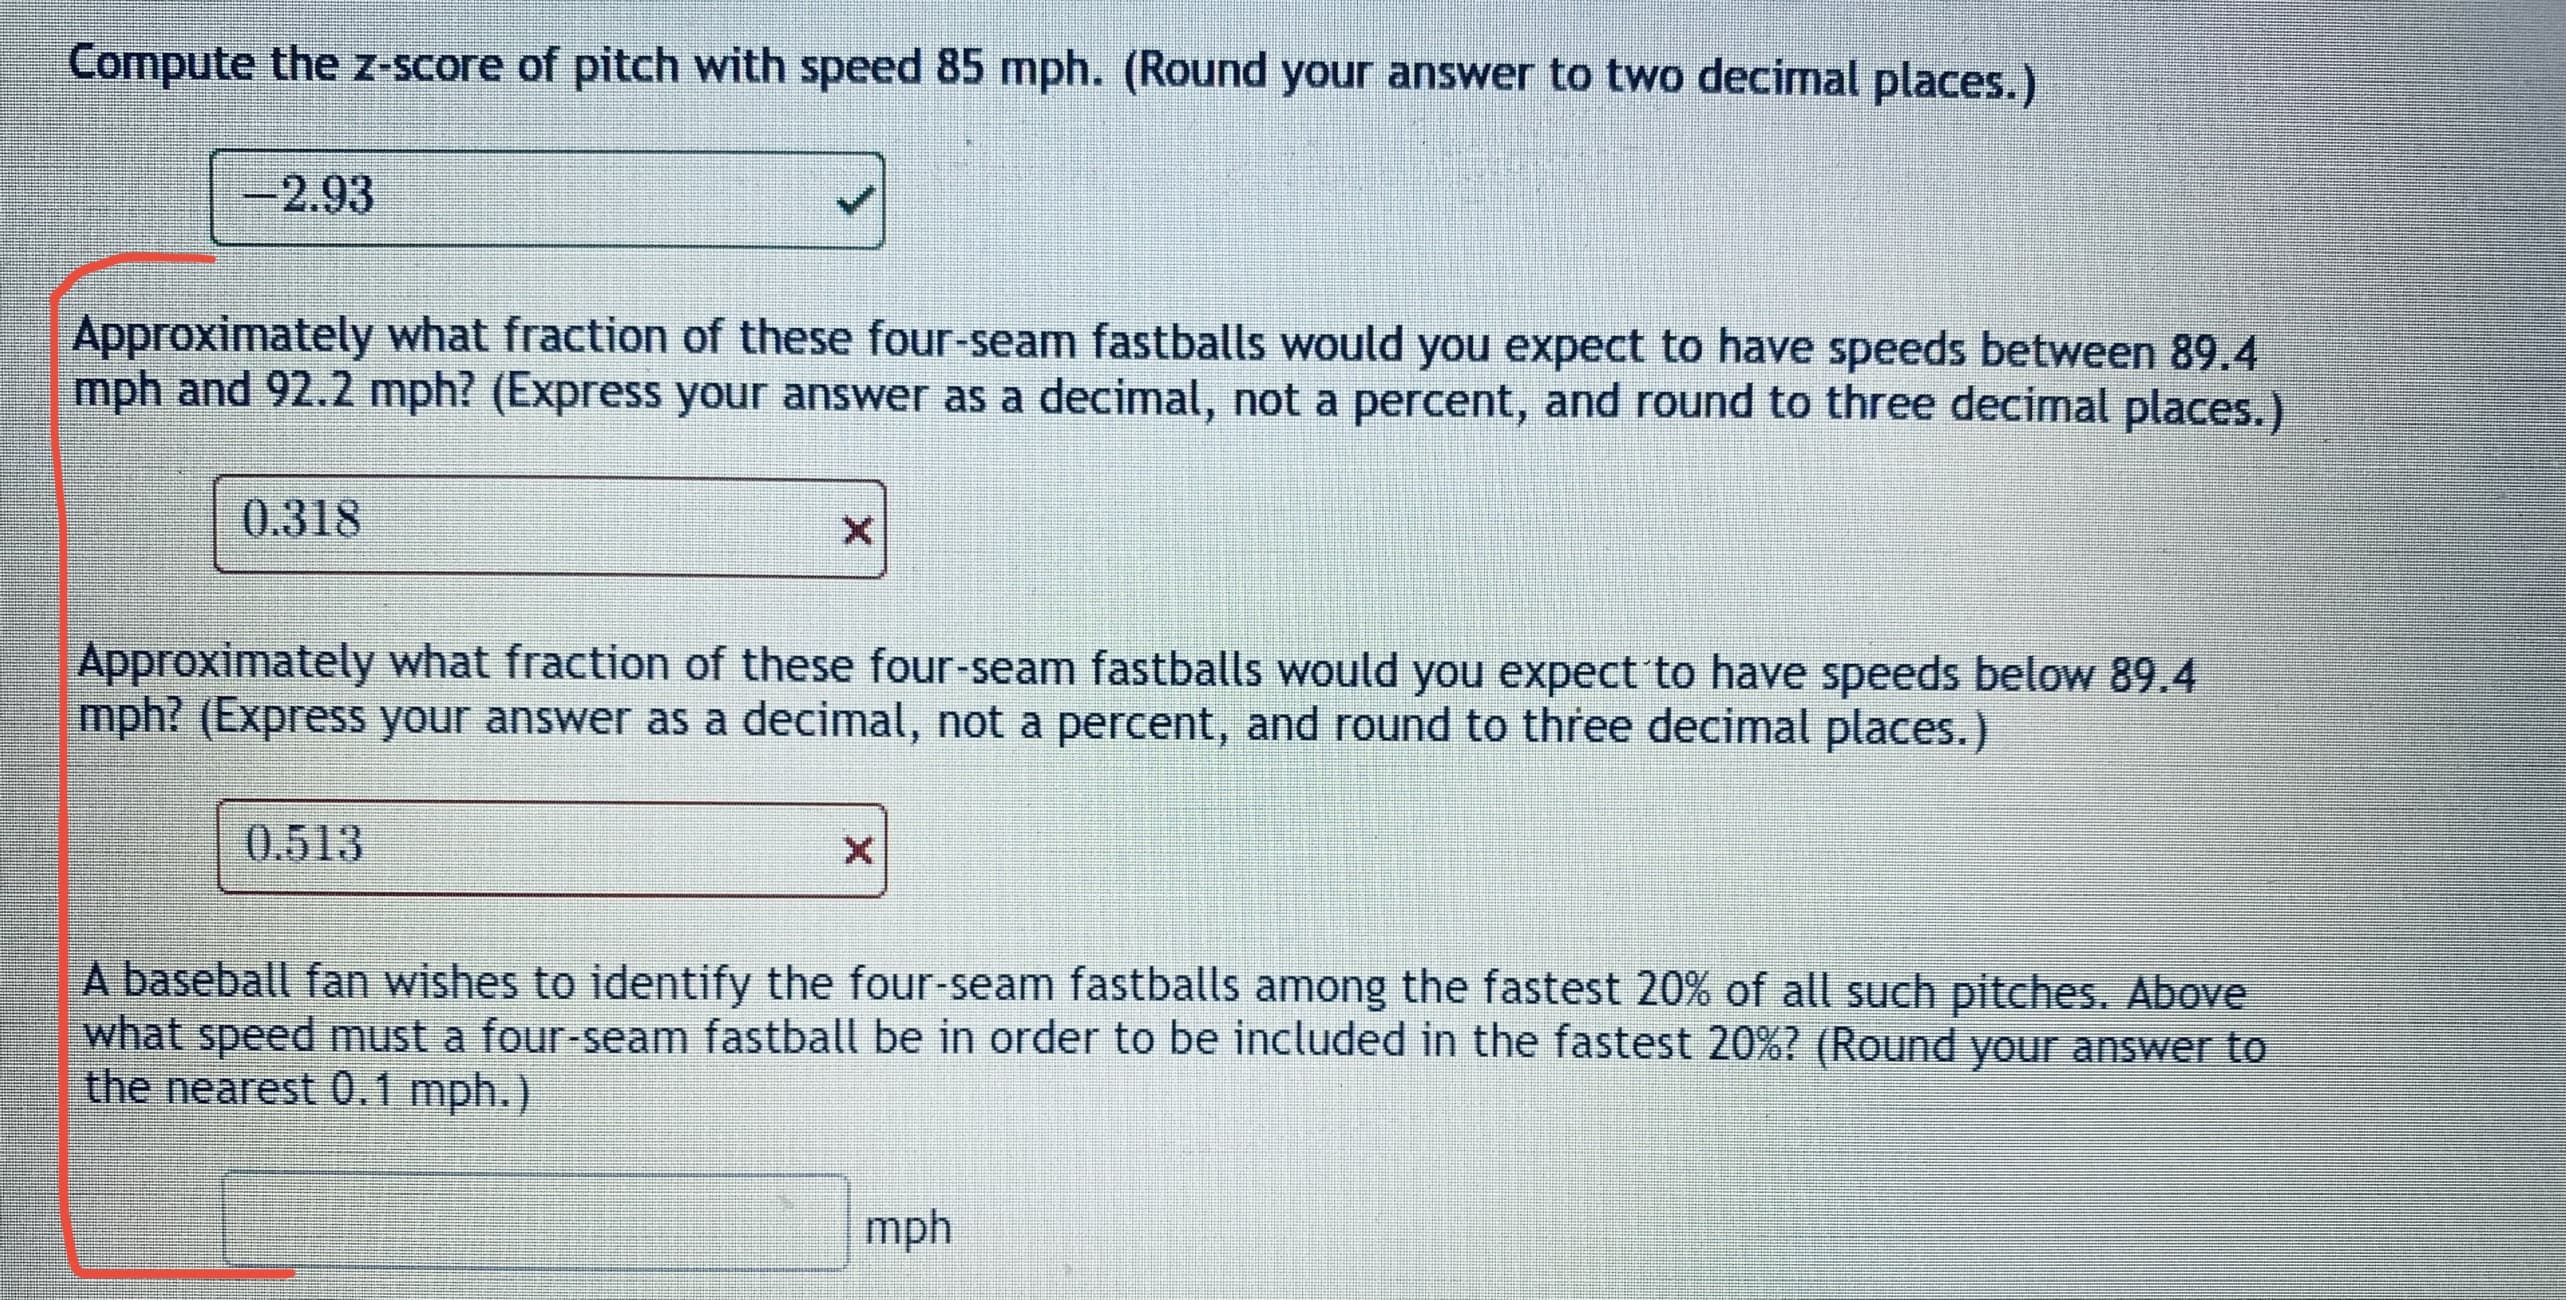 Approximately what fraction of these four-seam fastballs would you expect to have speeds between 89.4
mph and 92.2 mph? (Express your answer as a decimal, not a percent, and round to three decimal places.)
